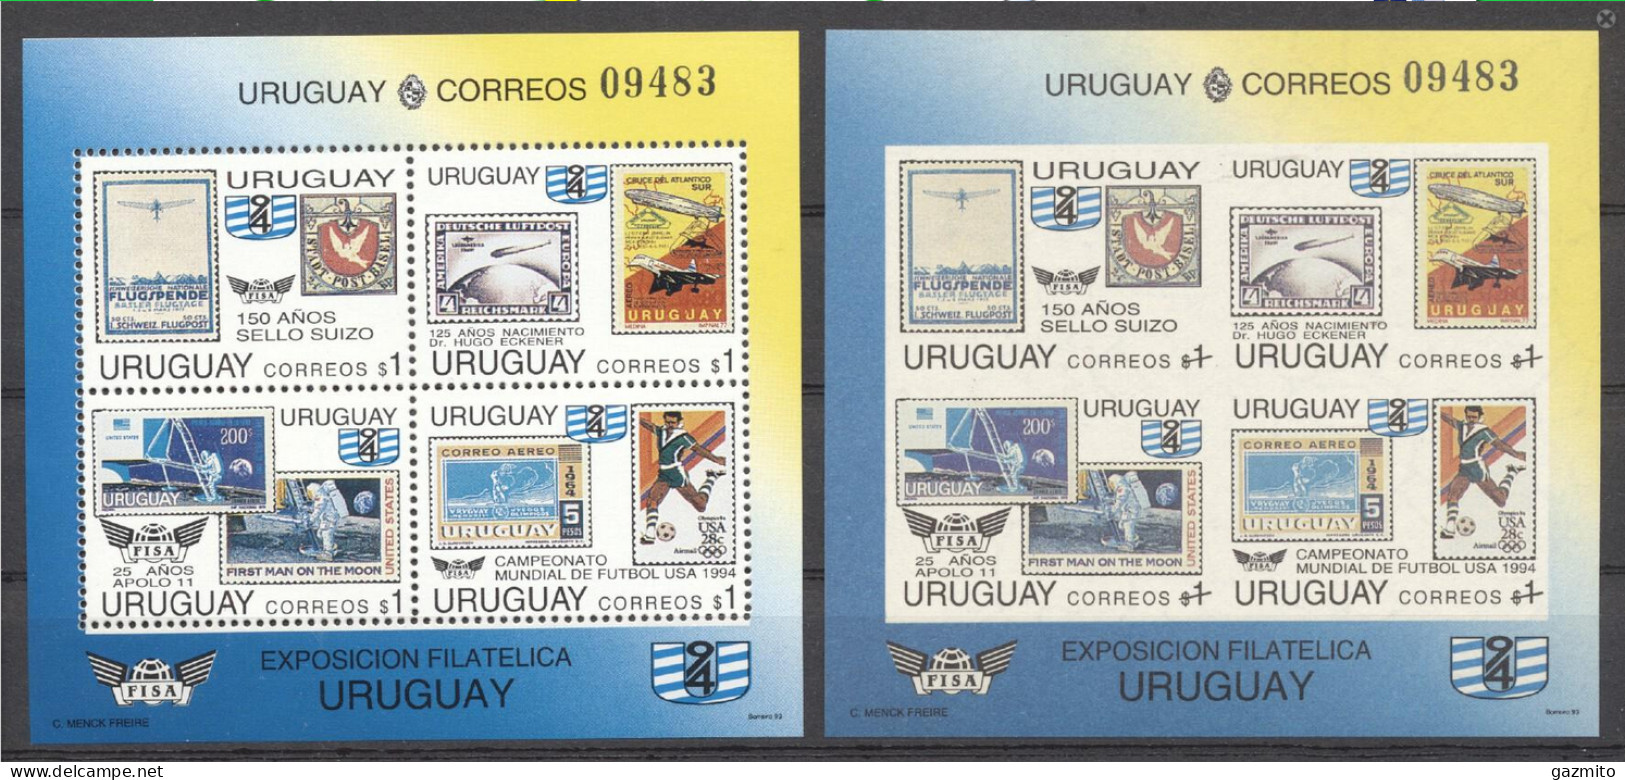 Uruguay 1993, Filaexpo, Stamp On Stamp, Concorde, Zeppelin, Space, Football, Olympic Games In Los Angeles, BF+BF IMPERFO - Uruguay